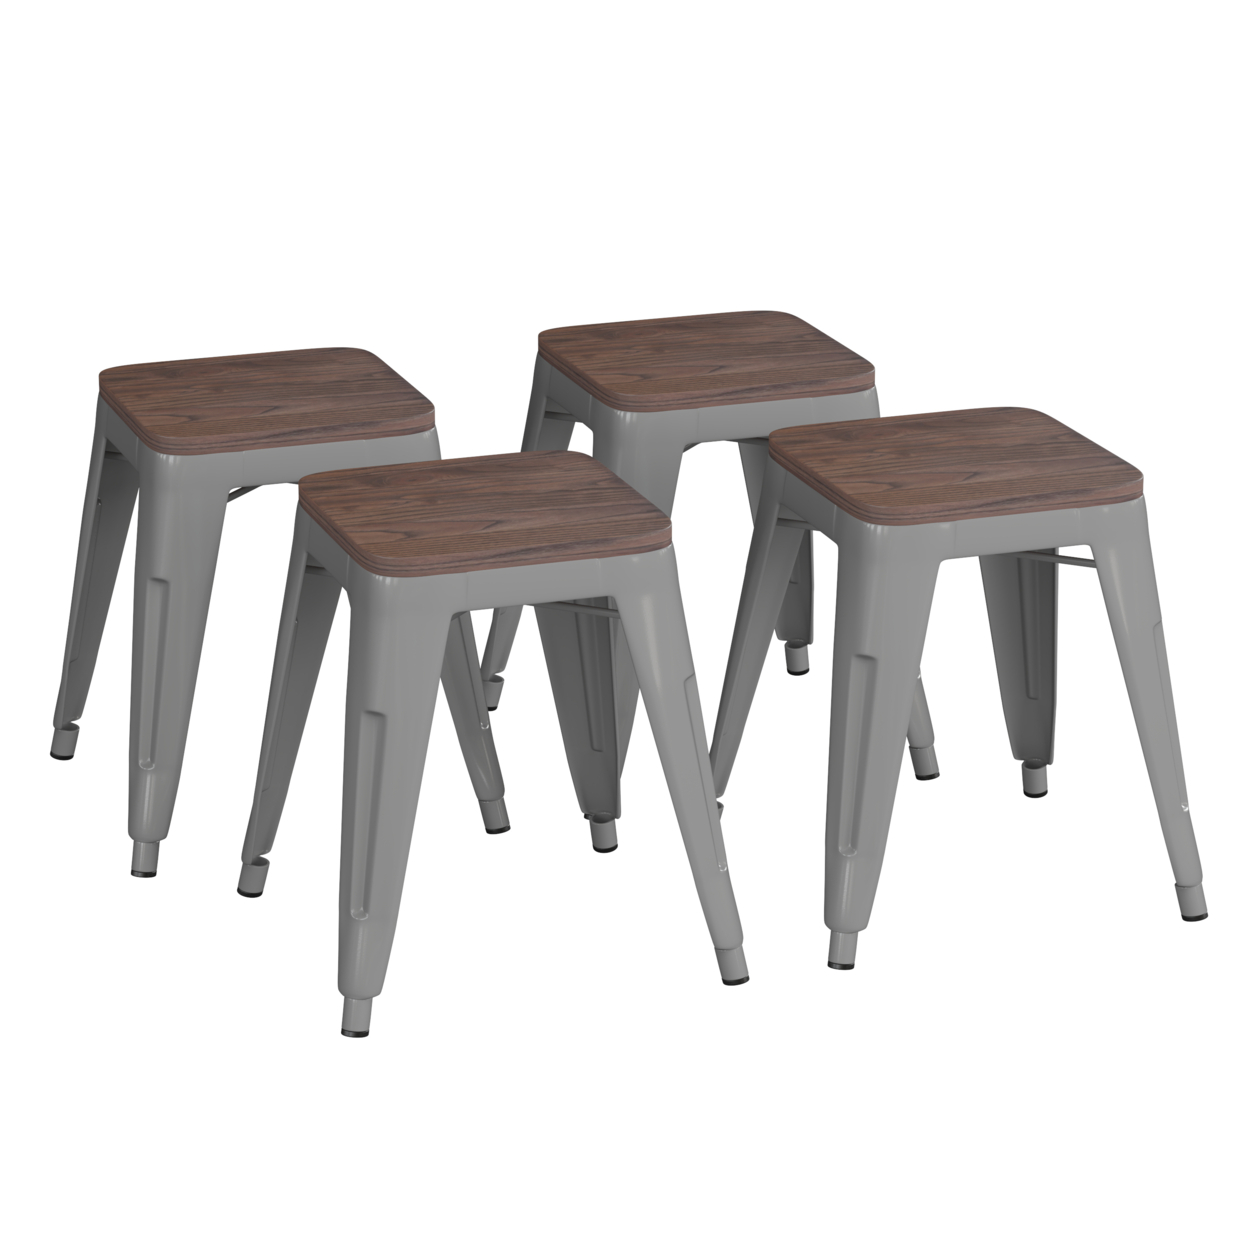 18 Backless Table Height Stool With Wooden Seat, Stackable Silver Metal Indoor Dining Stool, Commercial Grade - Set Of 4